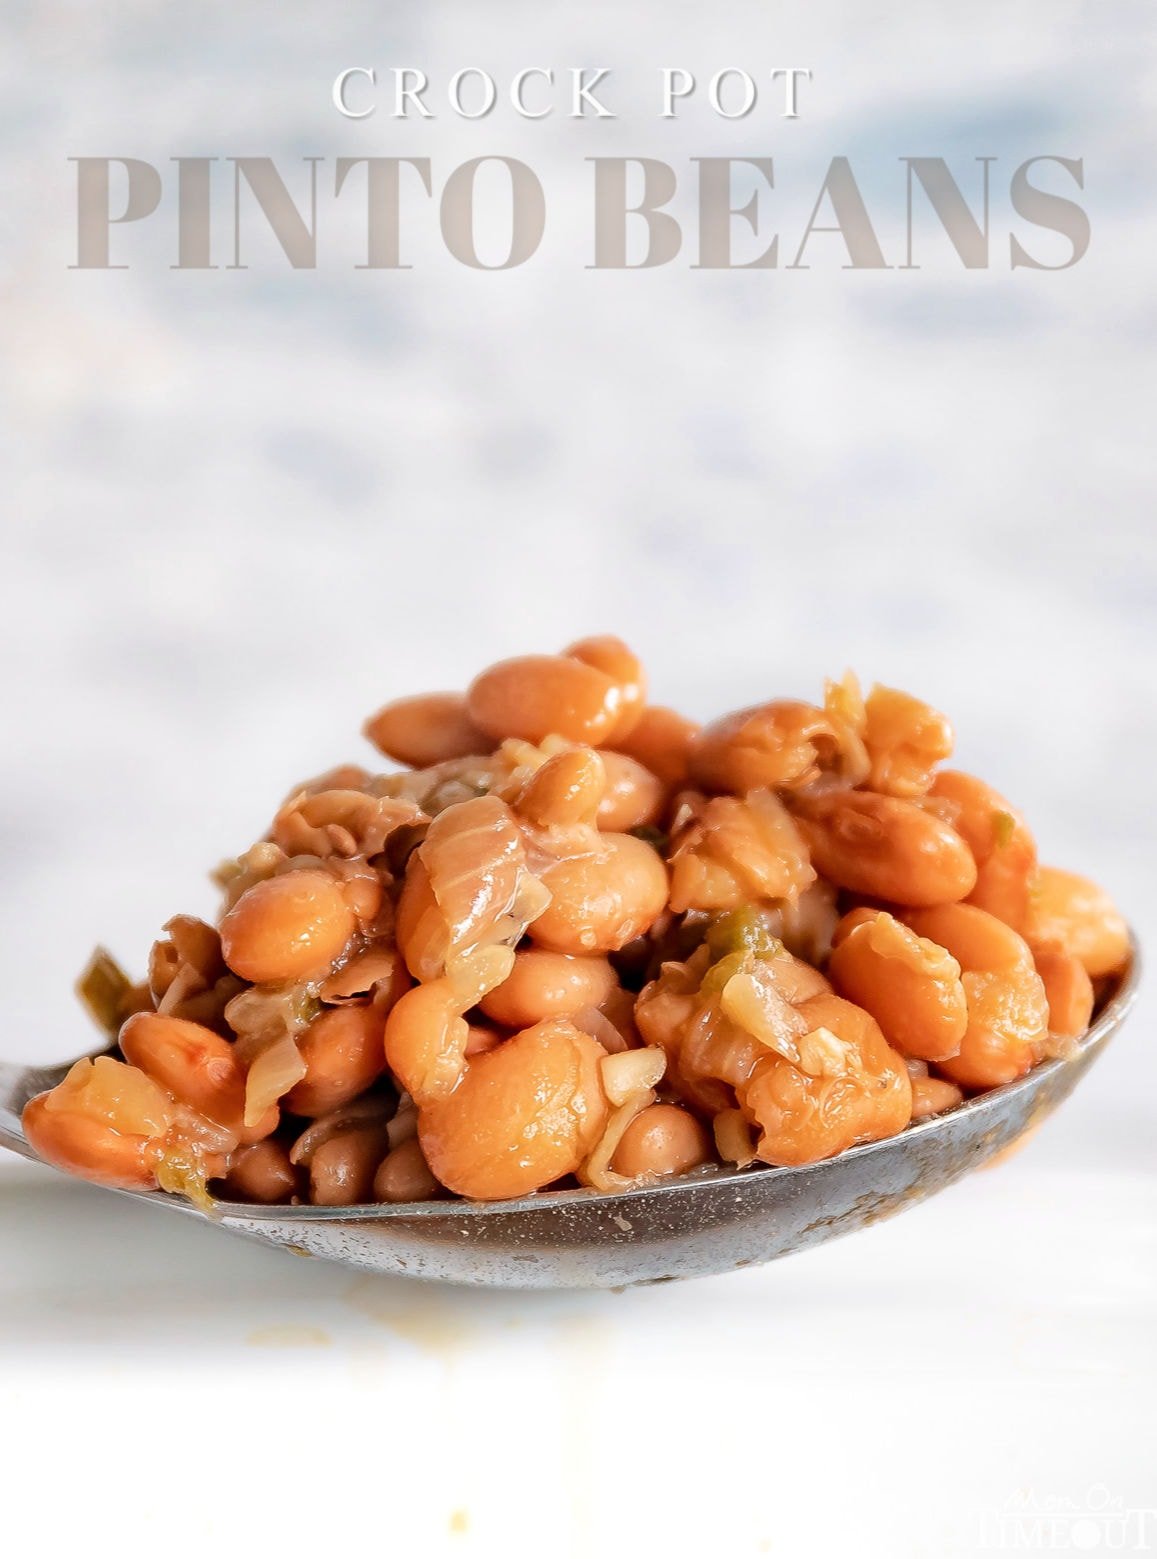 pinto beans recipe in a serving spoon with white crockpot with text overlay